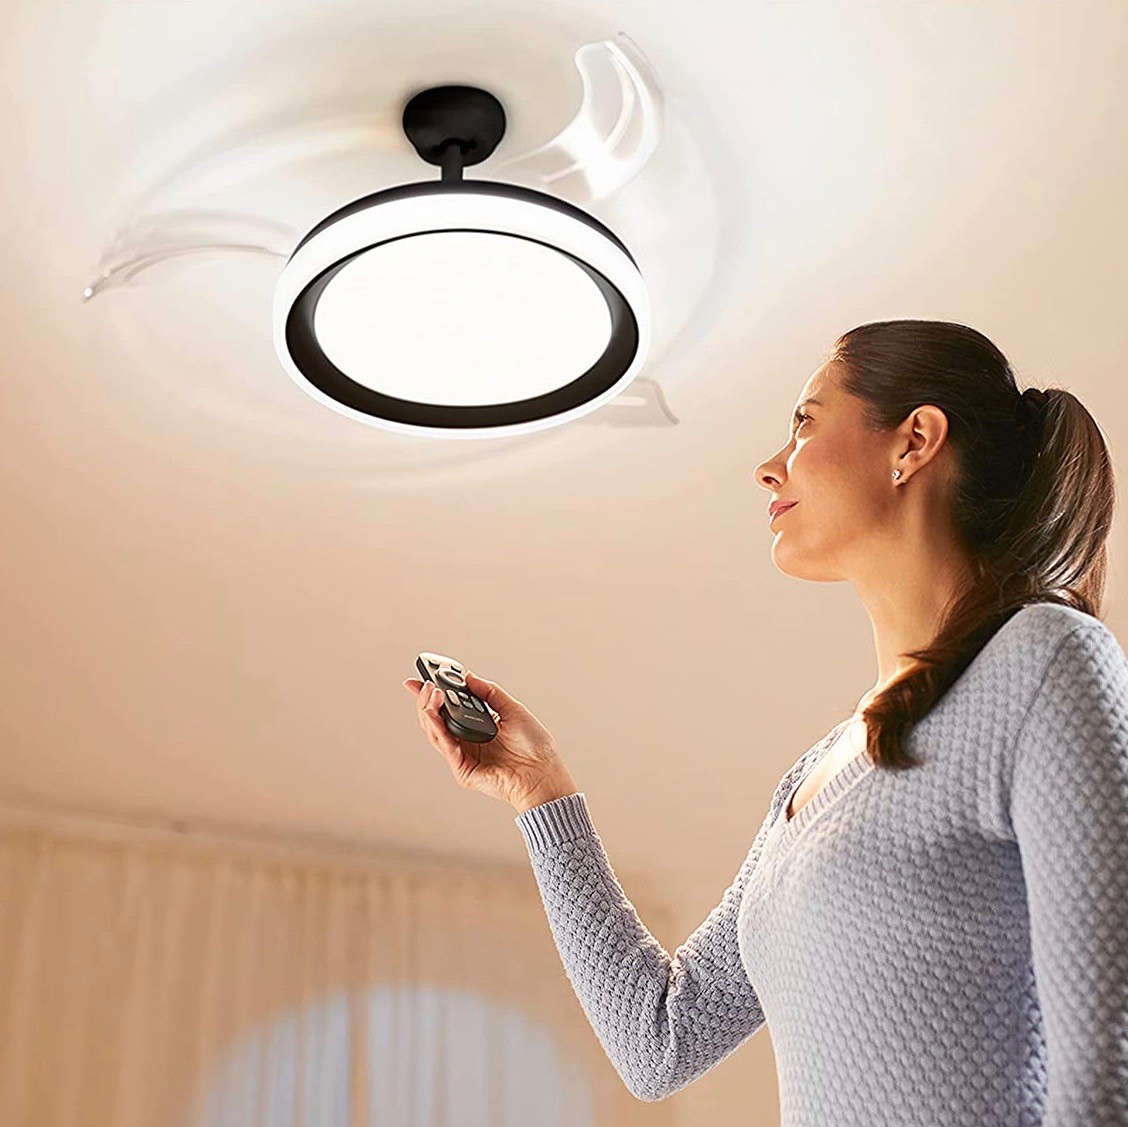 227,95 € Free Shipping | Ceiling fan with light Philips 35W 5000K Neutral light. Ø 51 cm. Remote control. LED with adjustable color temperature Metal casting. White Color